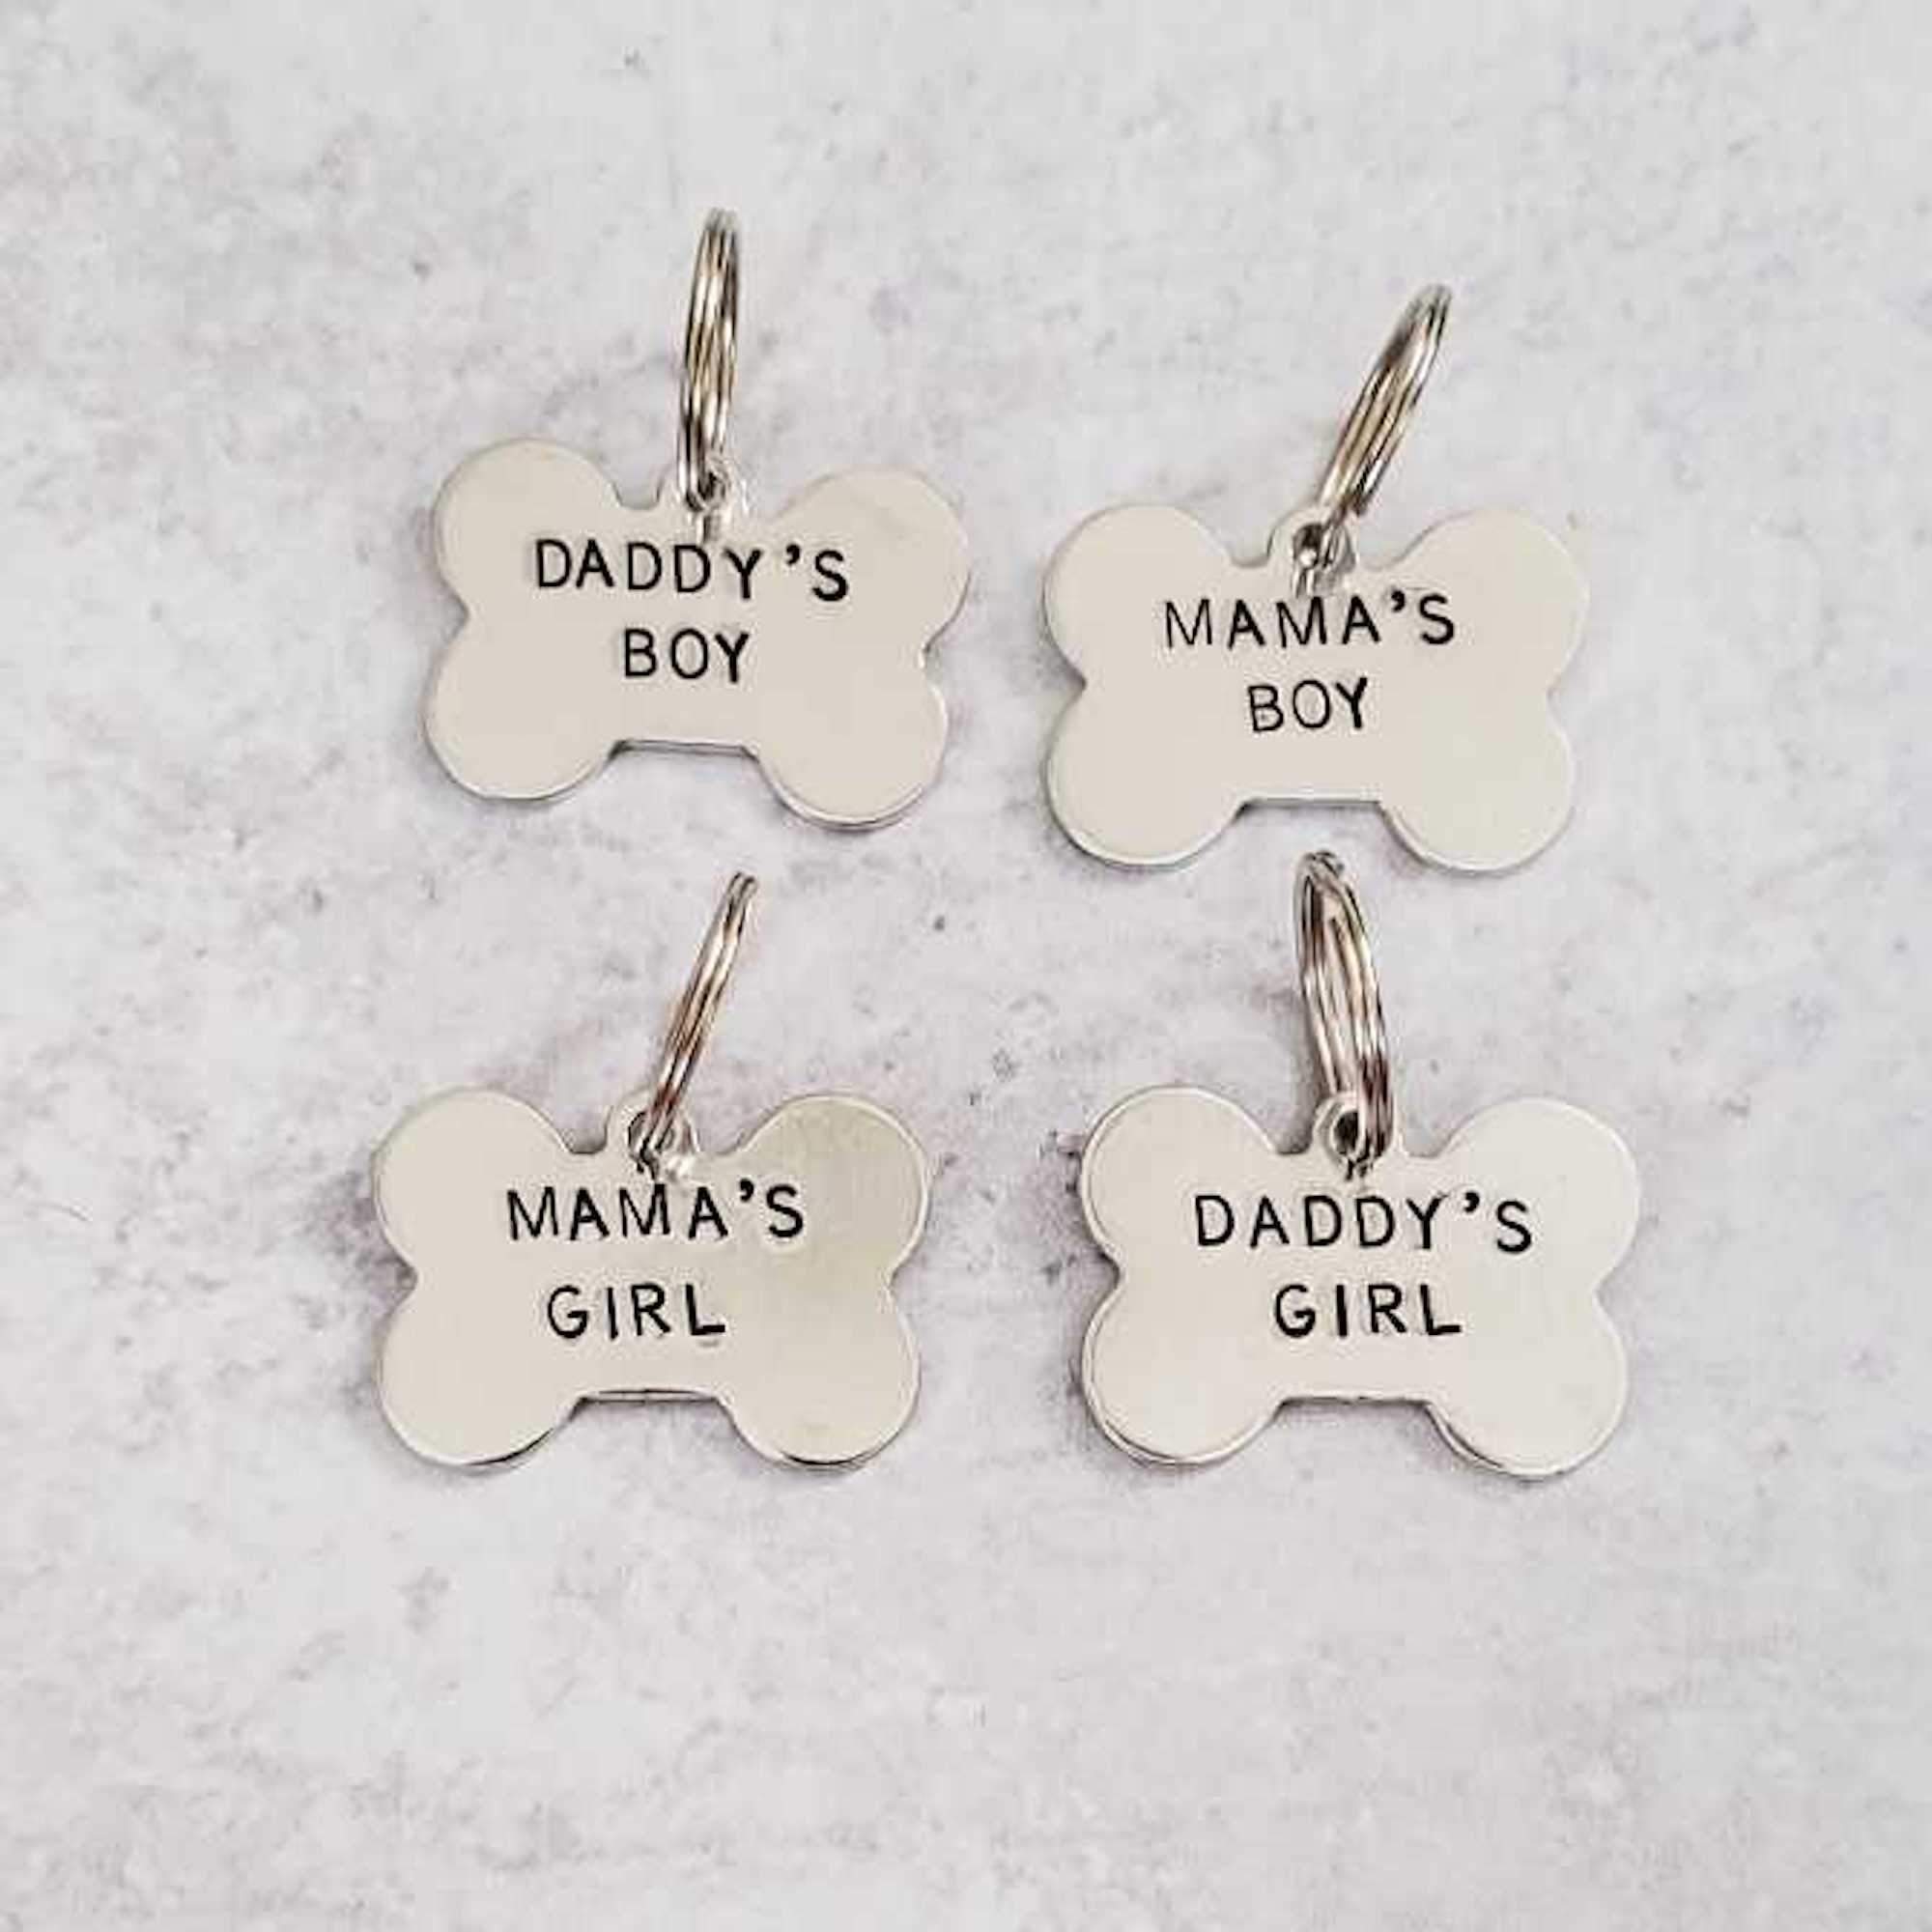 MAMA'S BOY / DADDY'S GIRL Bone-Shaped Pet Tag Salt and Sparkle